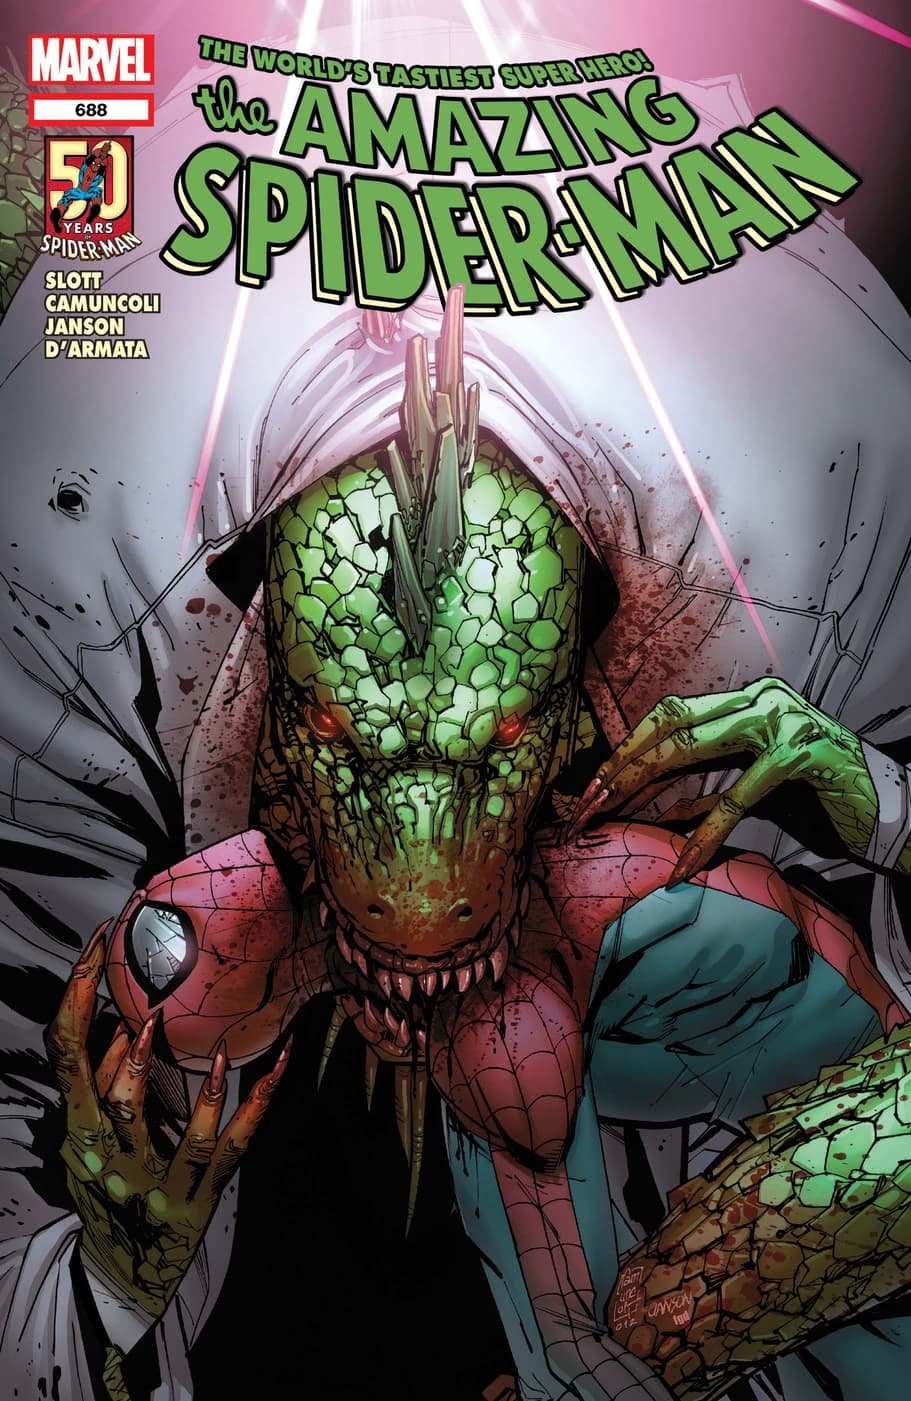 AMAZING SPIDER-MAN (1999) #688 The Lizard Dr. Curt Connors